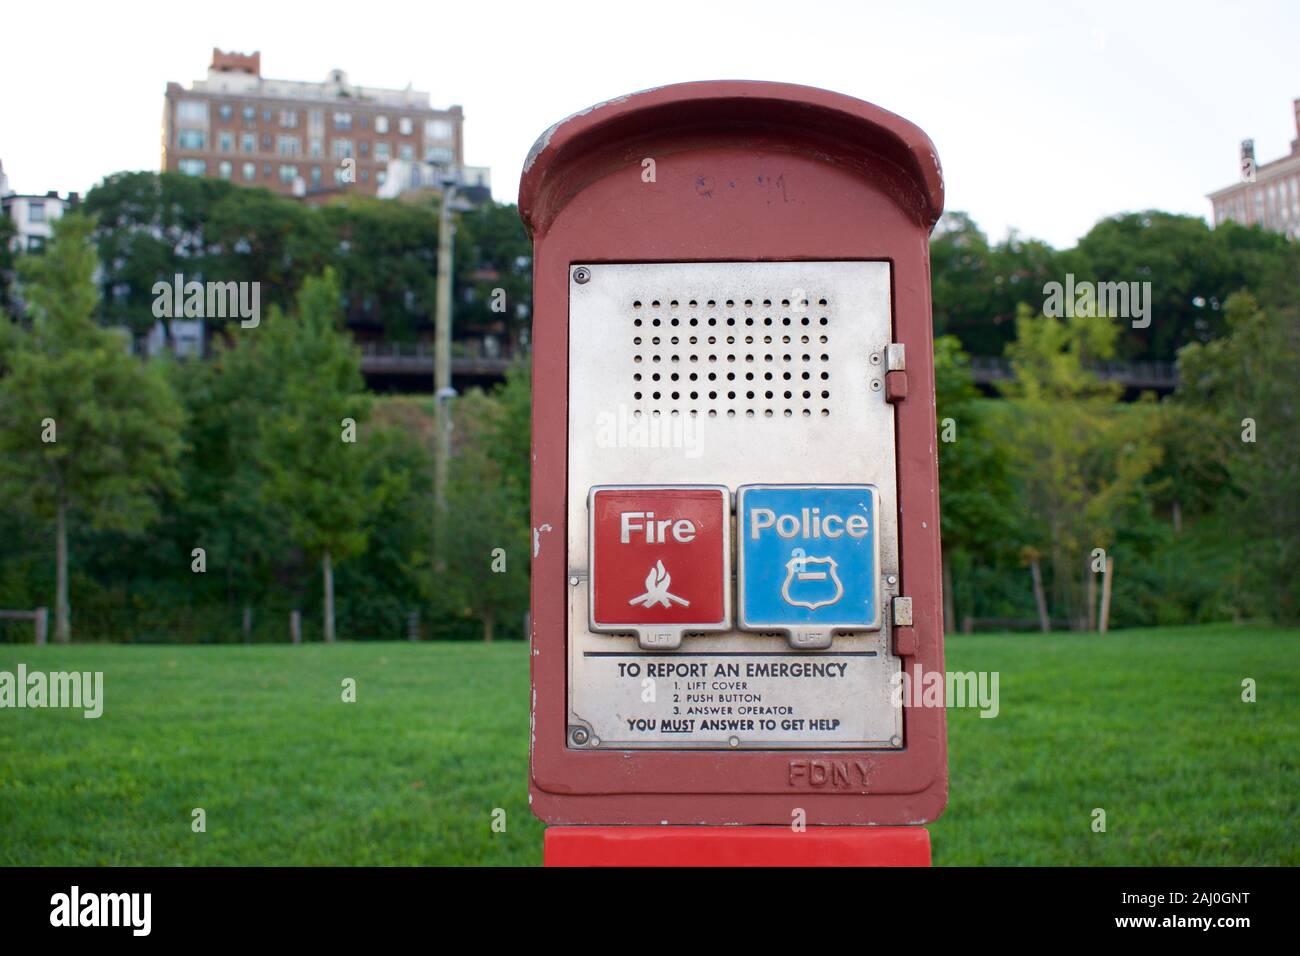 An emergency police and fire call box in New York City. A red metal box with a red flap covering red button for FDNY and a blue button for NYPD. Stock Photo